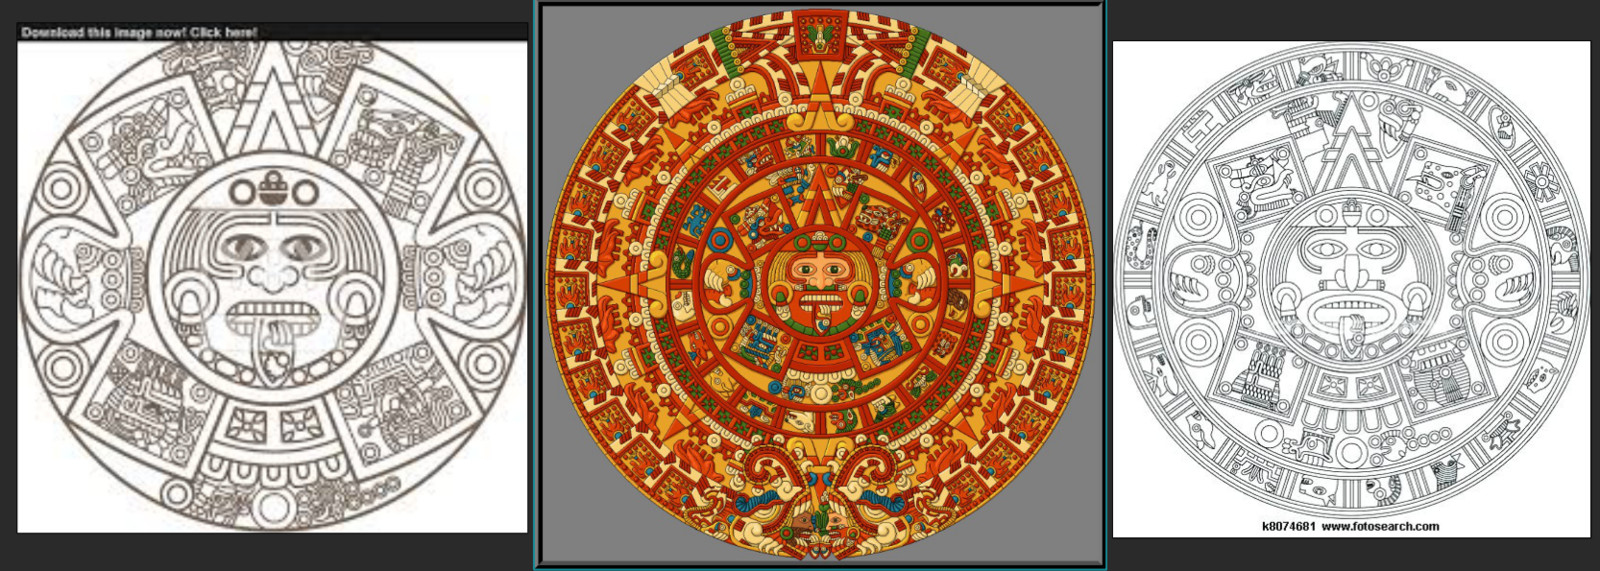 Theres Many illustrated version of the Aztec Sun Stone 